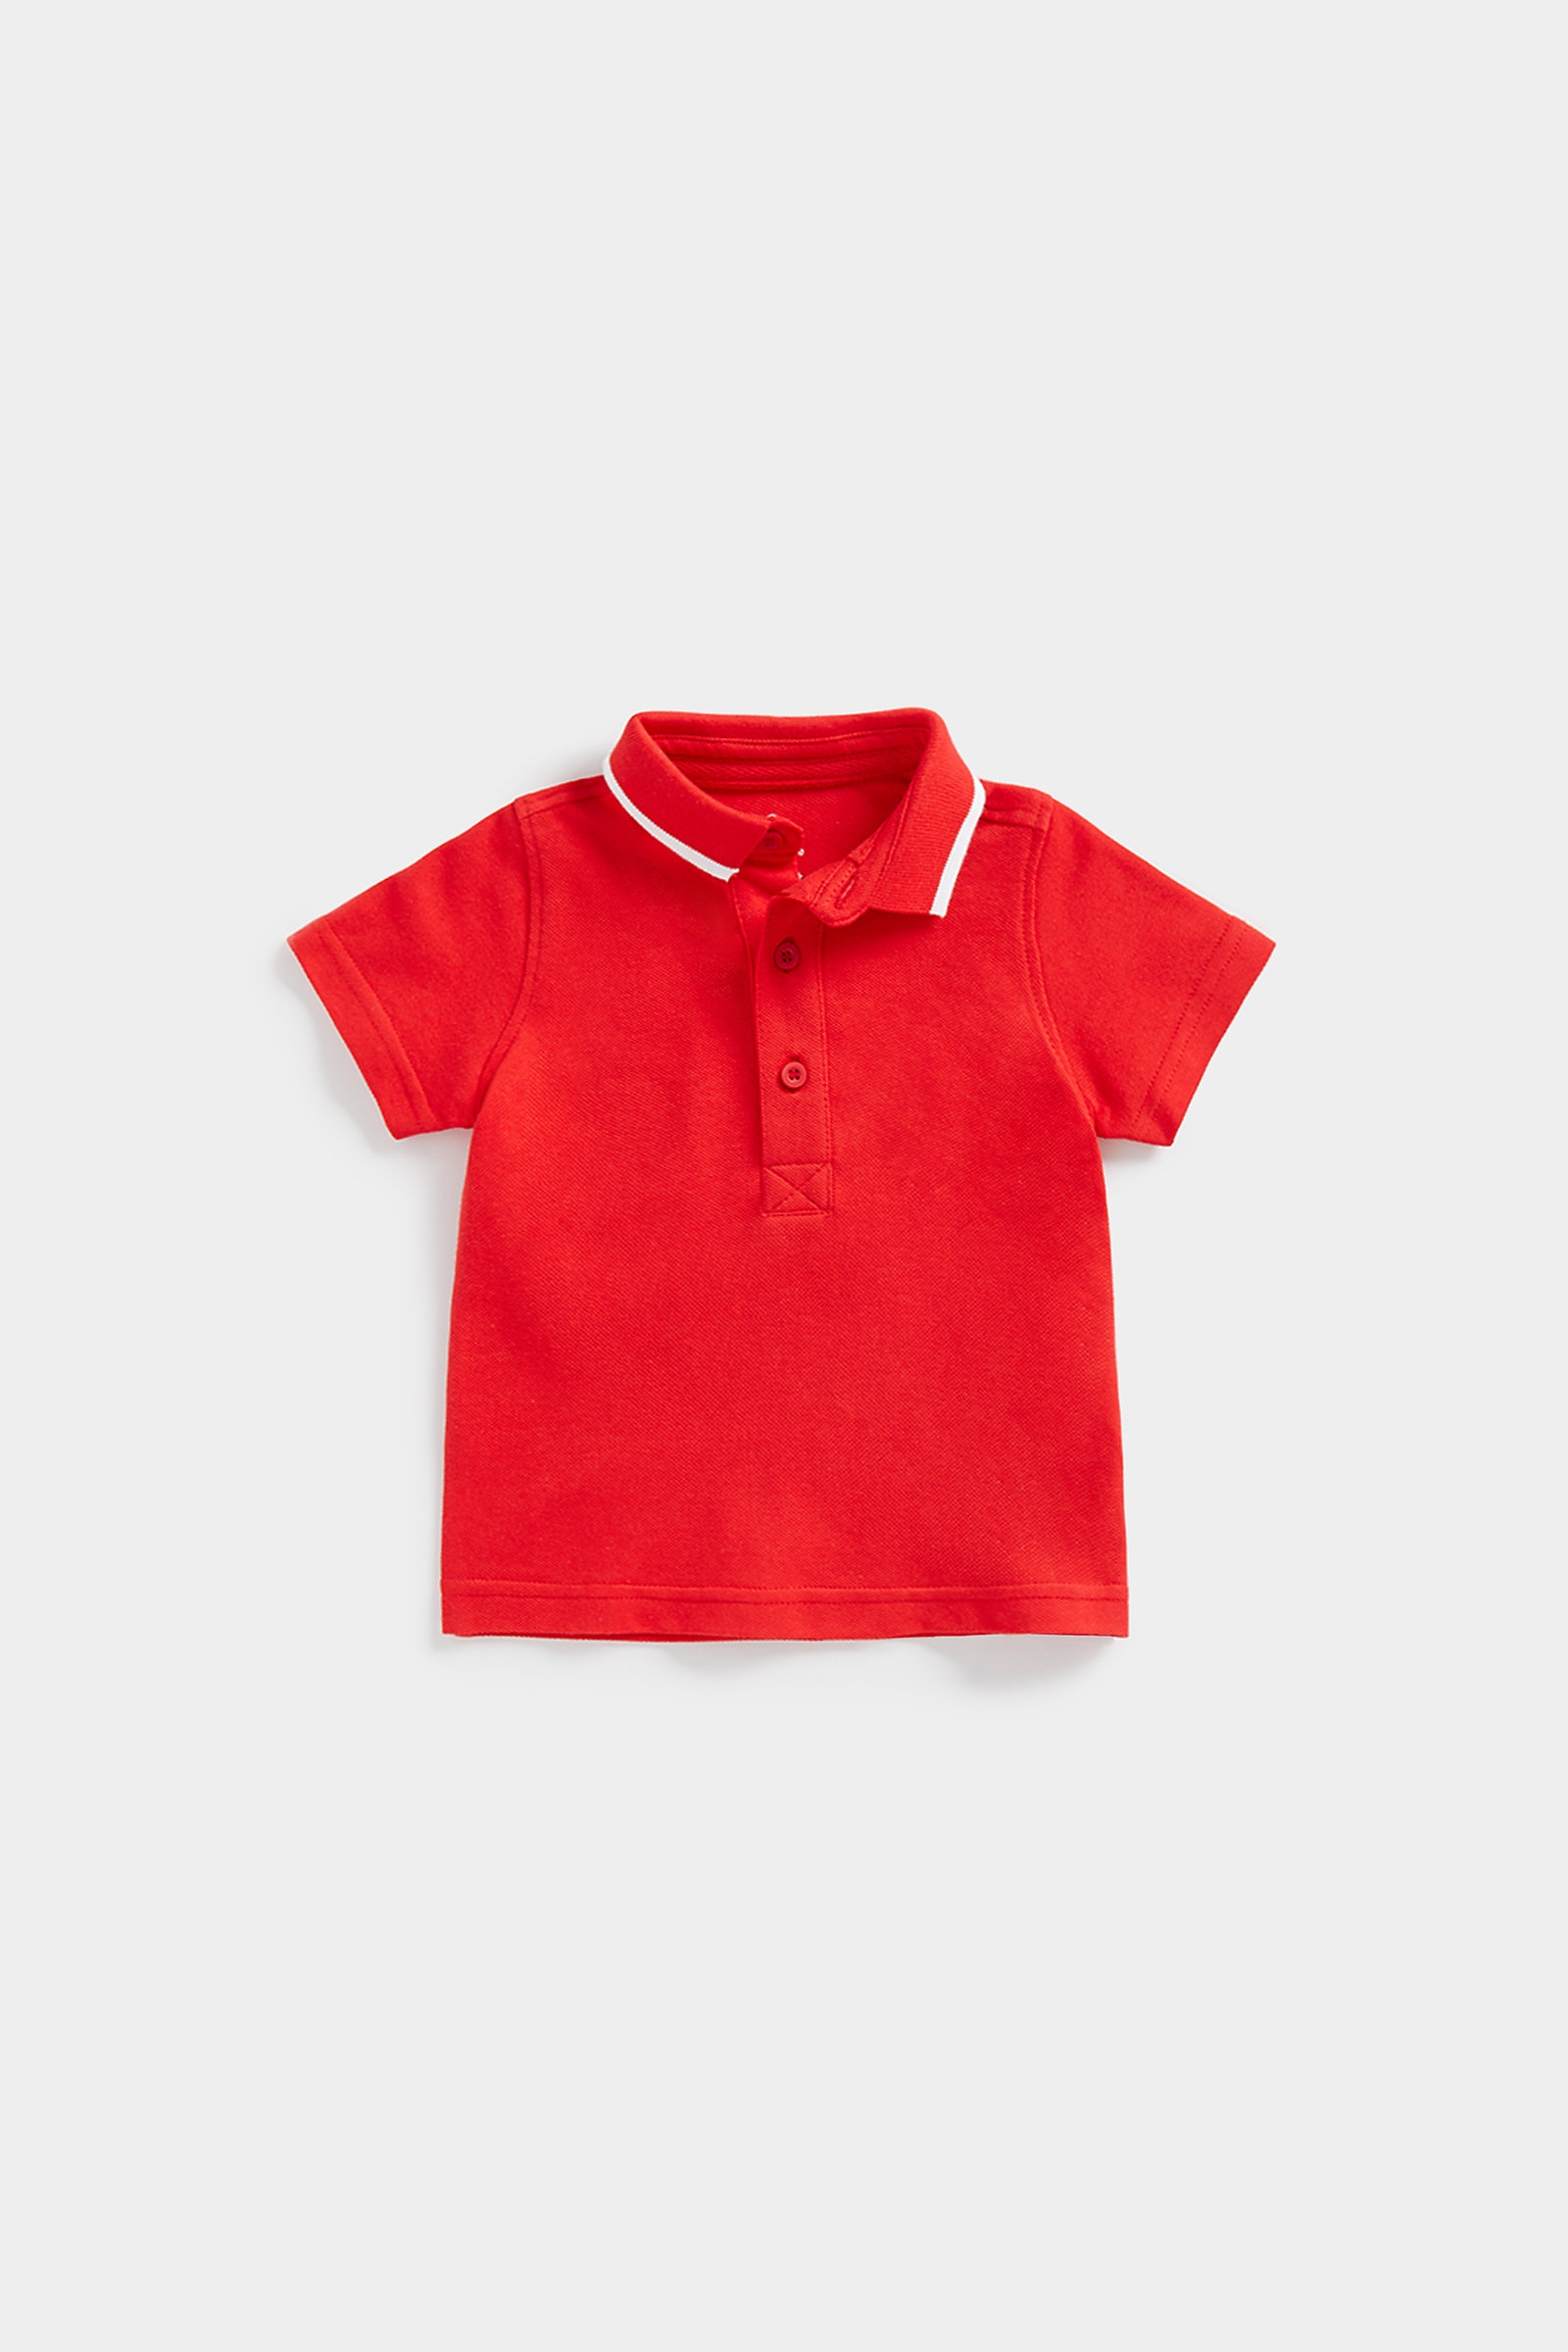 Boys Short Sleeves Polo Red Polo Shirt -Red